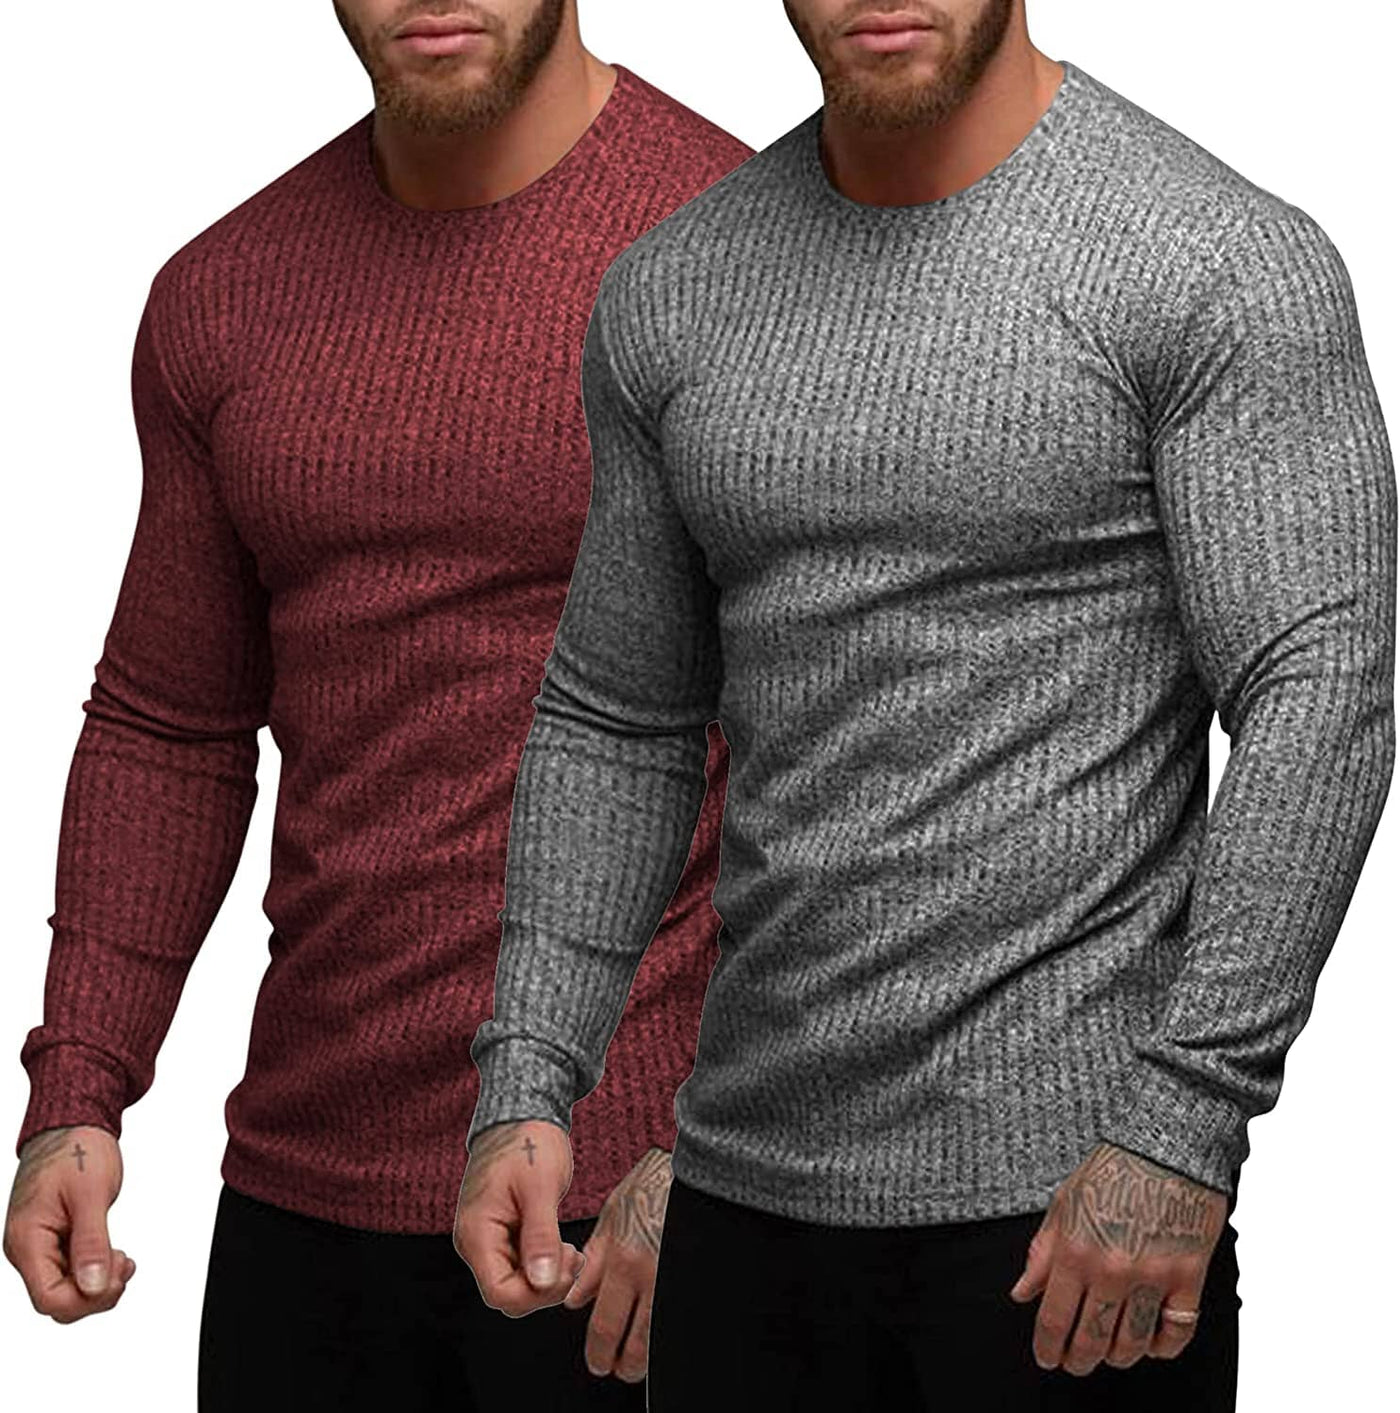 2-Pack Stretch Gym Bodybuilding T-Shirt (US Only) T-Shirt COOFANDY Store Wine Red/Dark Grey S 